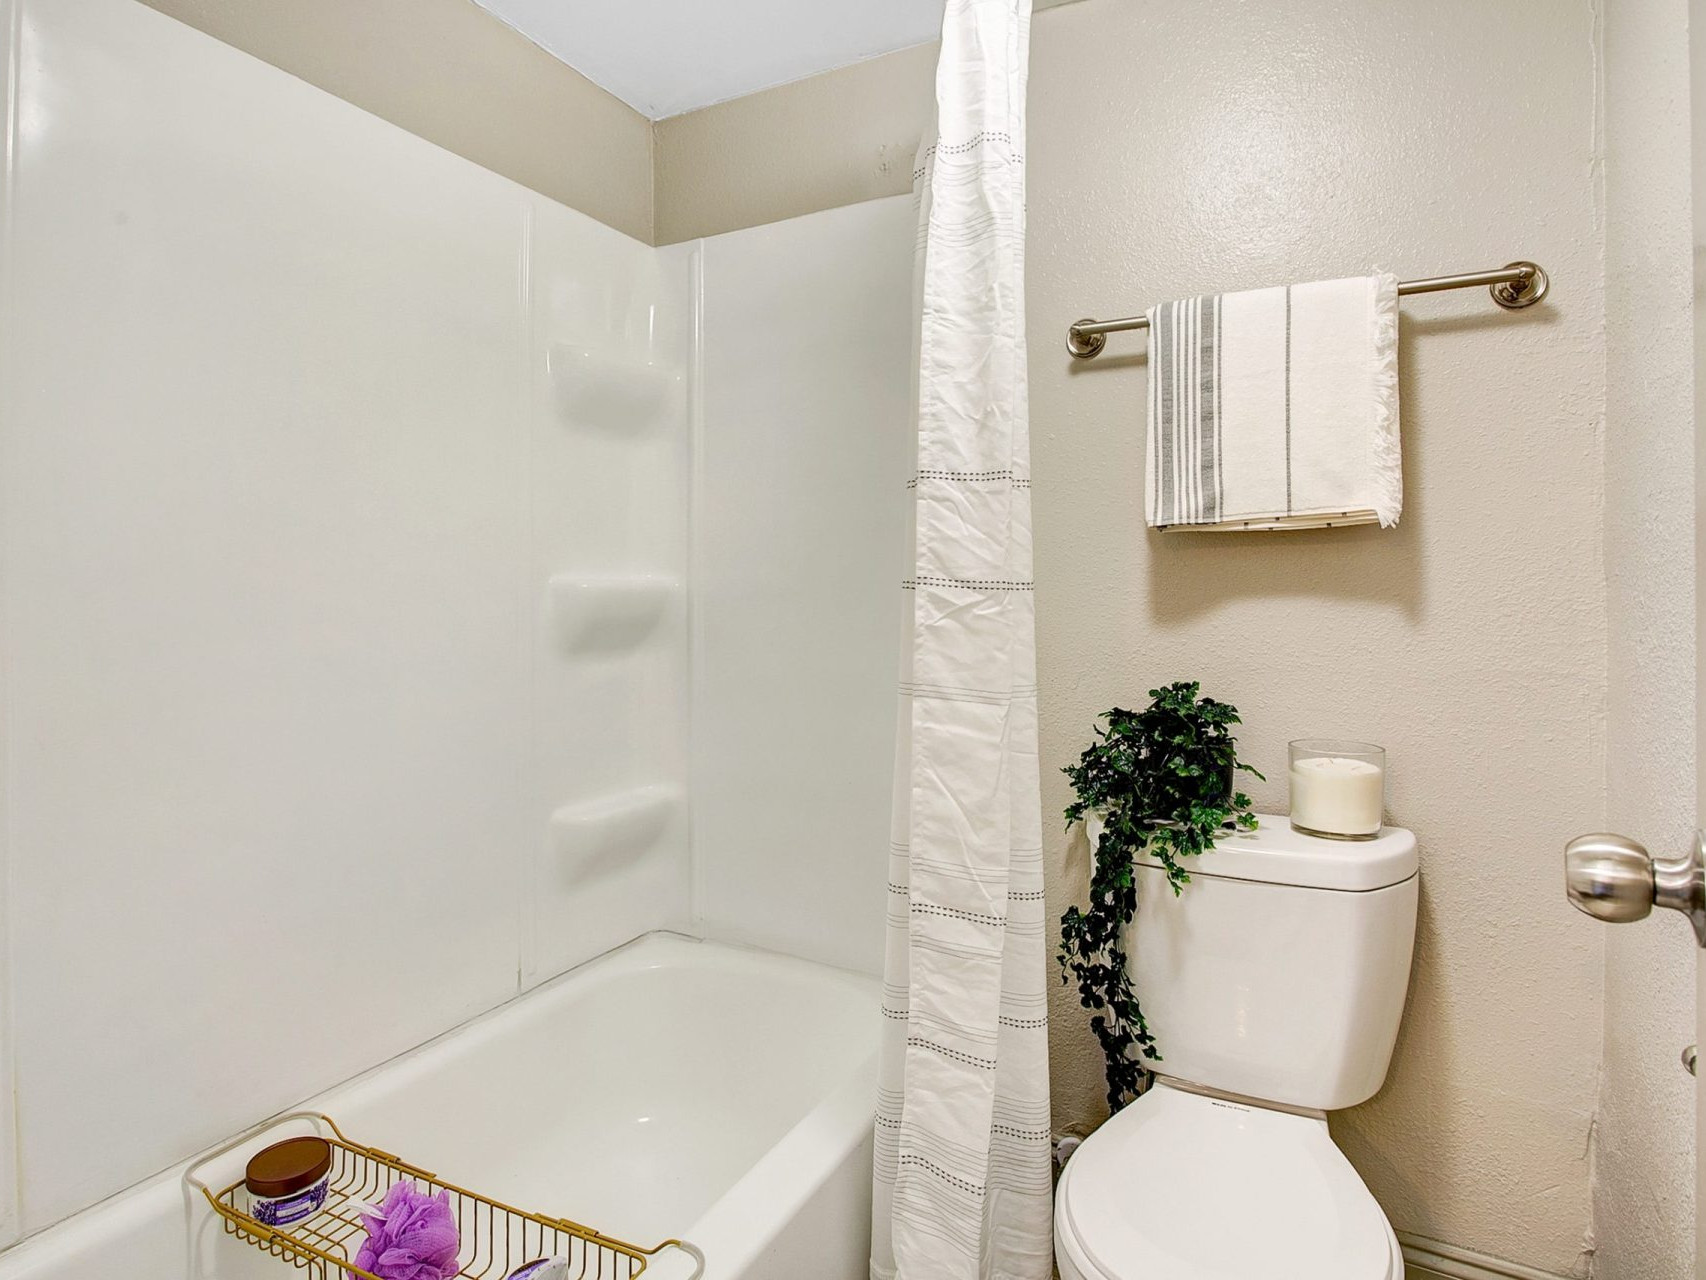 A bathroom with a shower/tub combination, a toilet, and a towel bar.